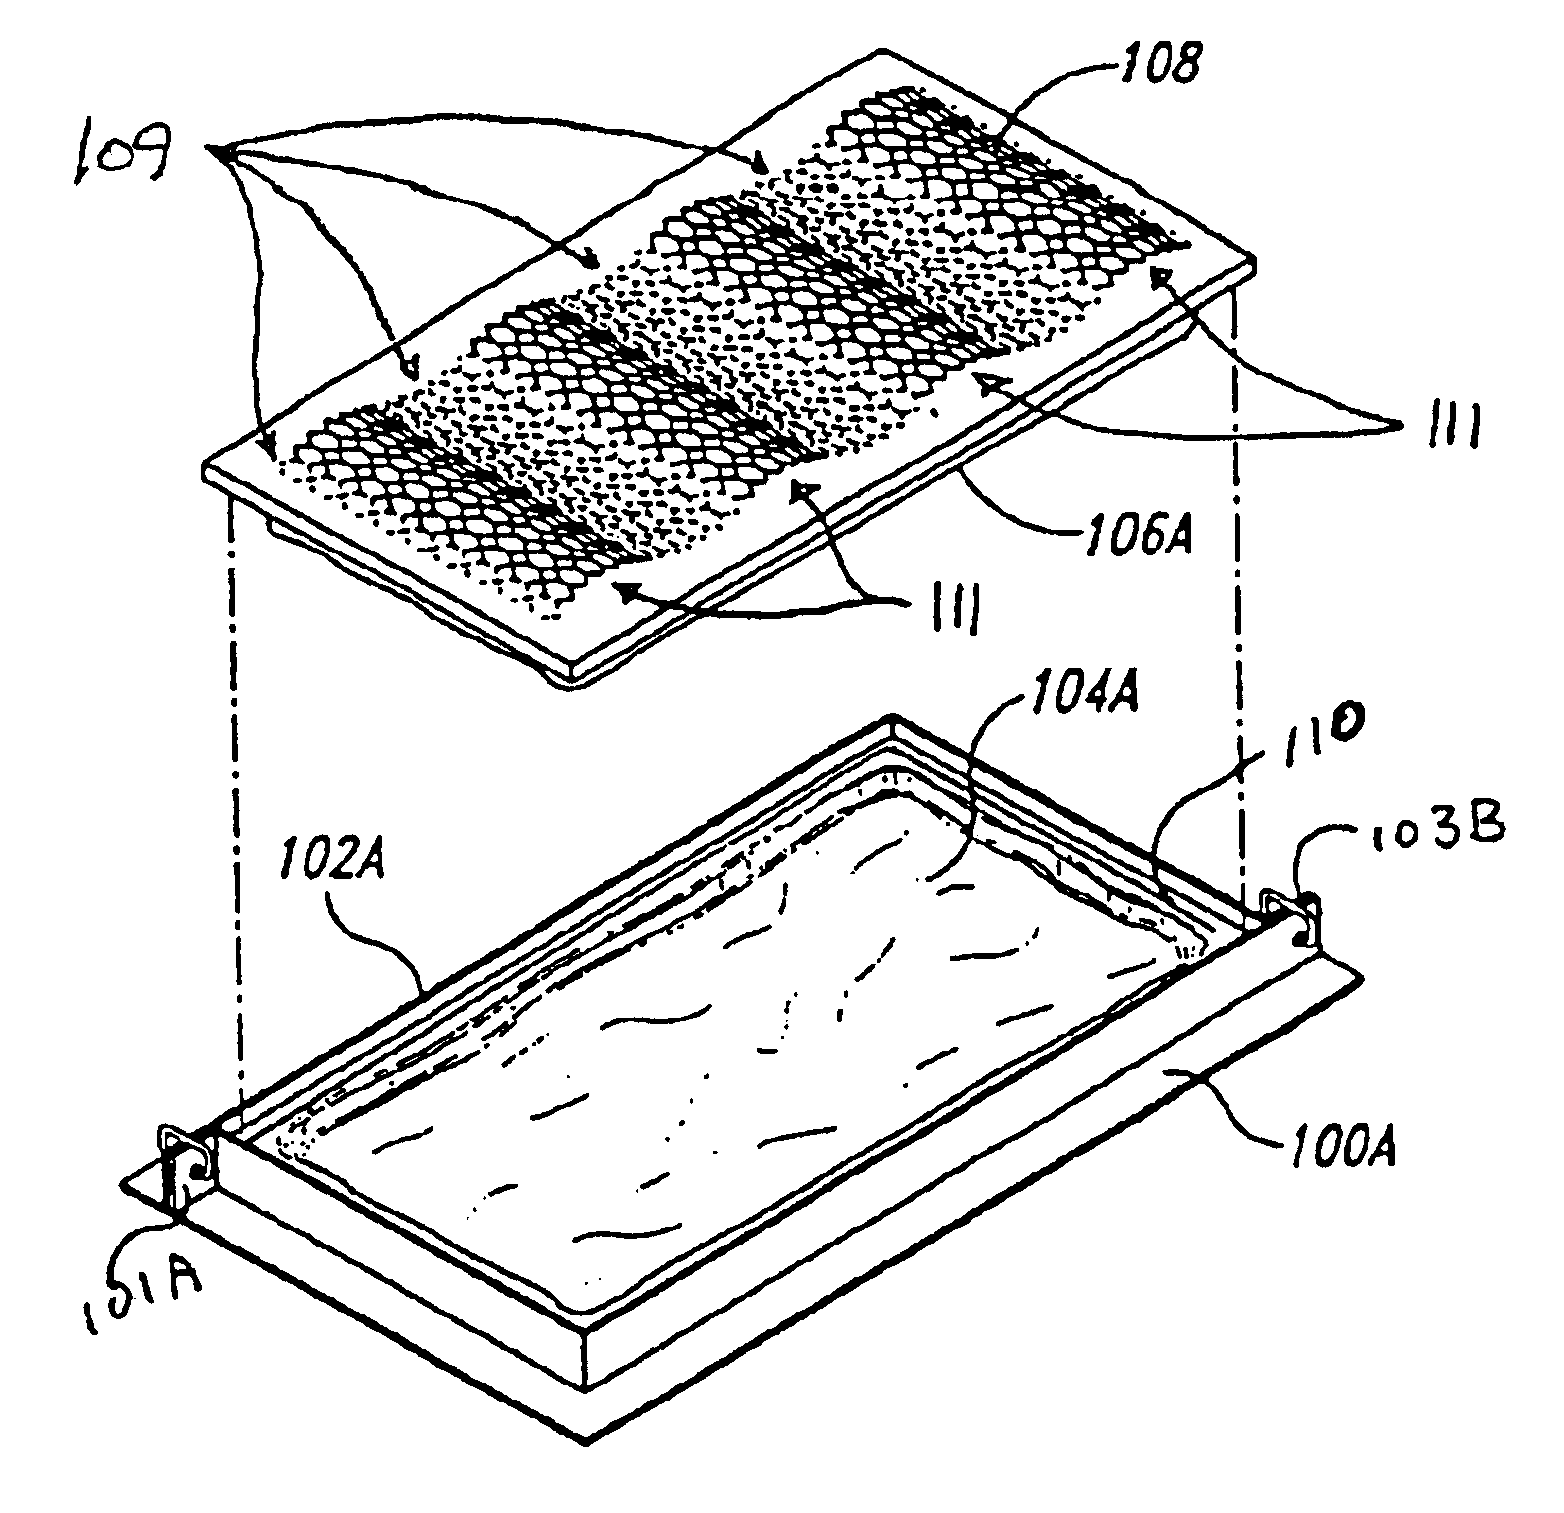 Method and apparatus for making foam blocks and for building structures therewith